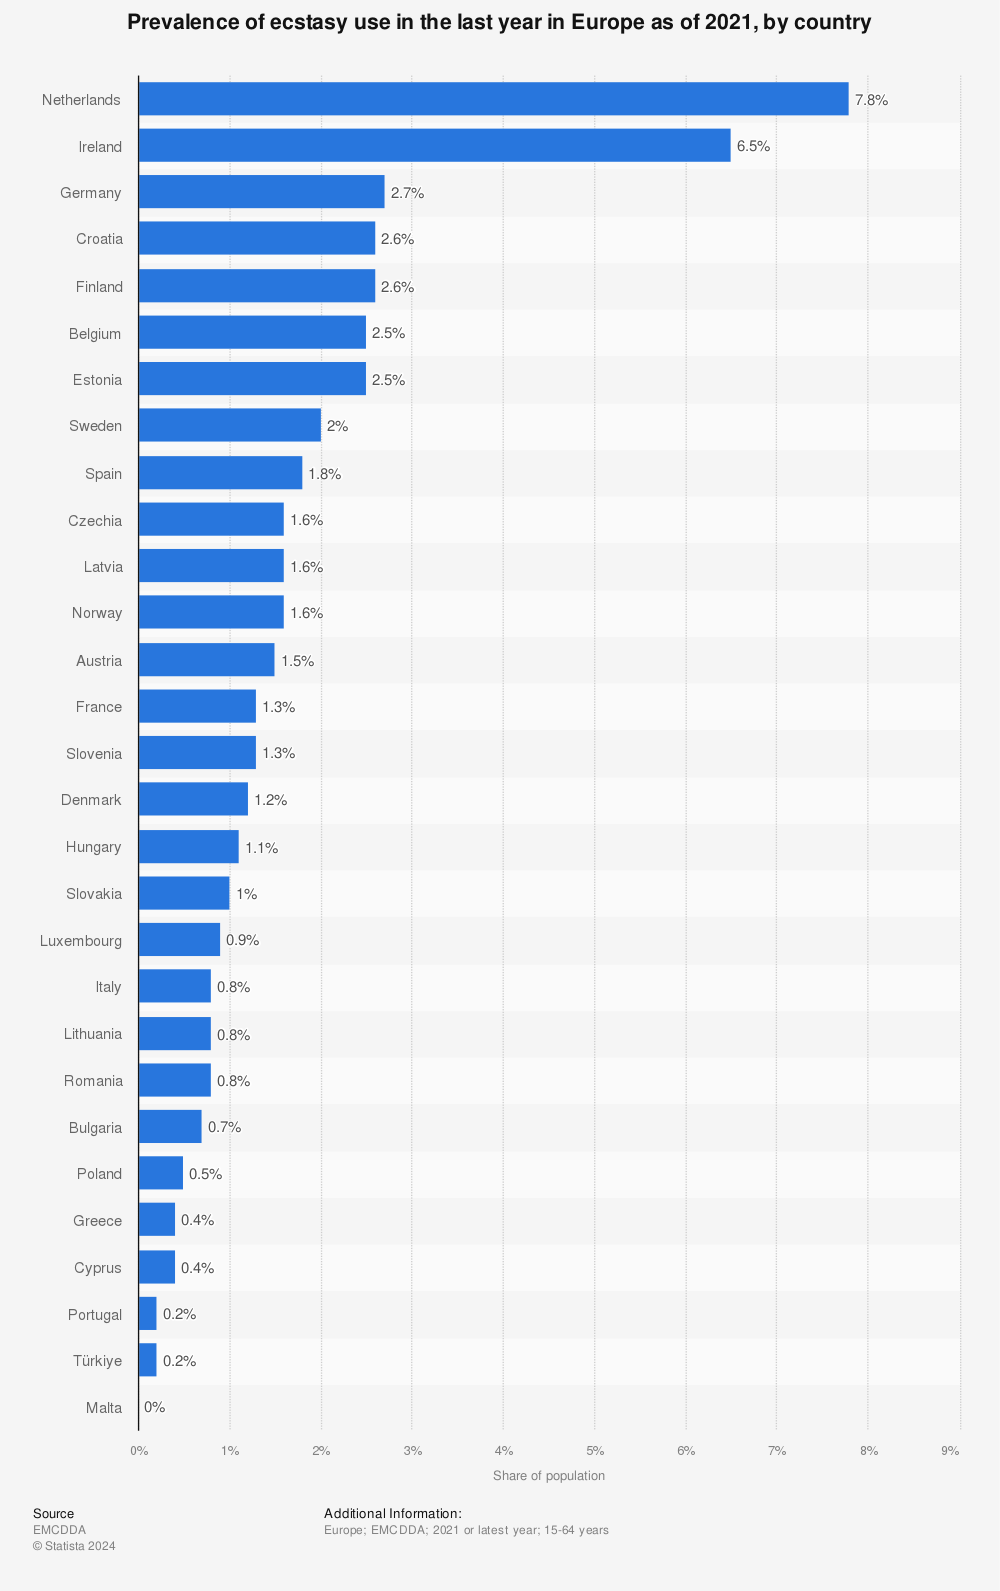 Statistic: Prevalence of ecstasy use in the last year in Europe as of 2021, by country | Statista